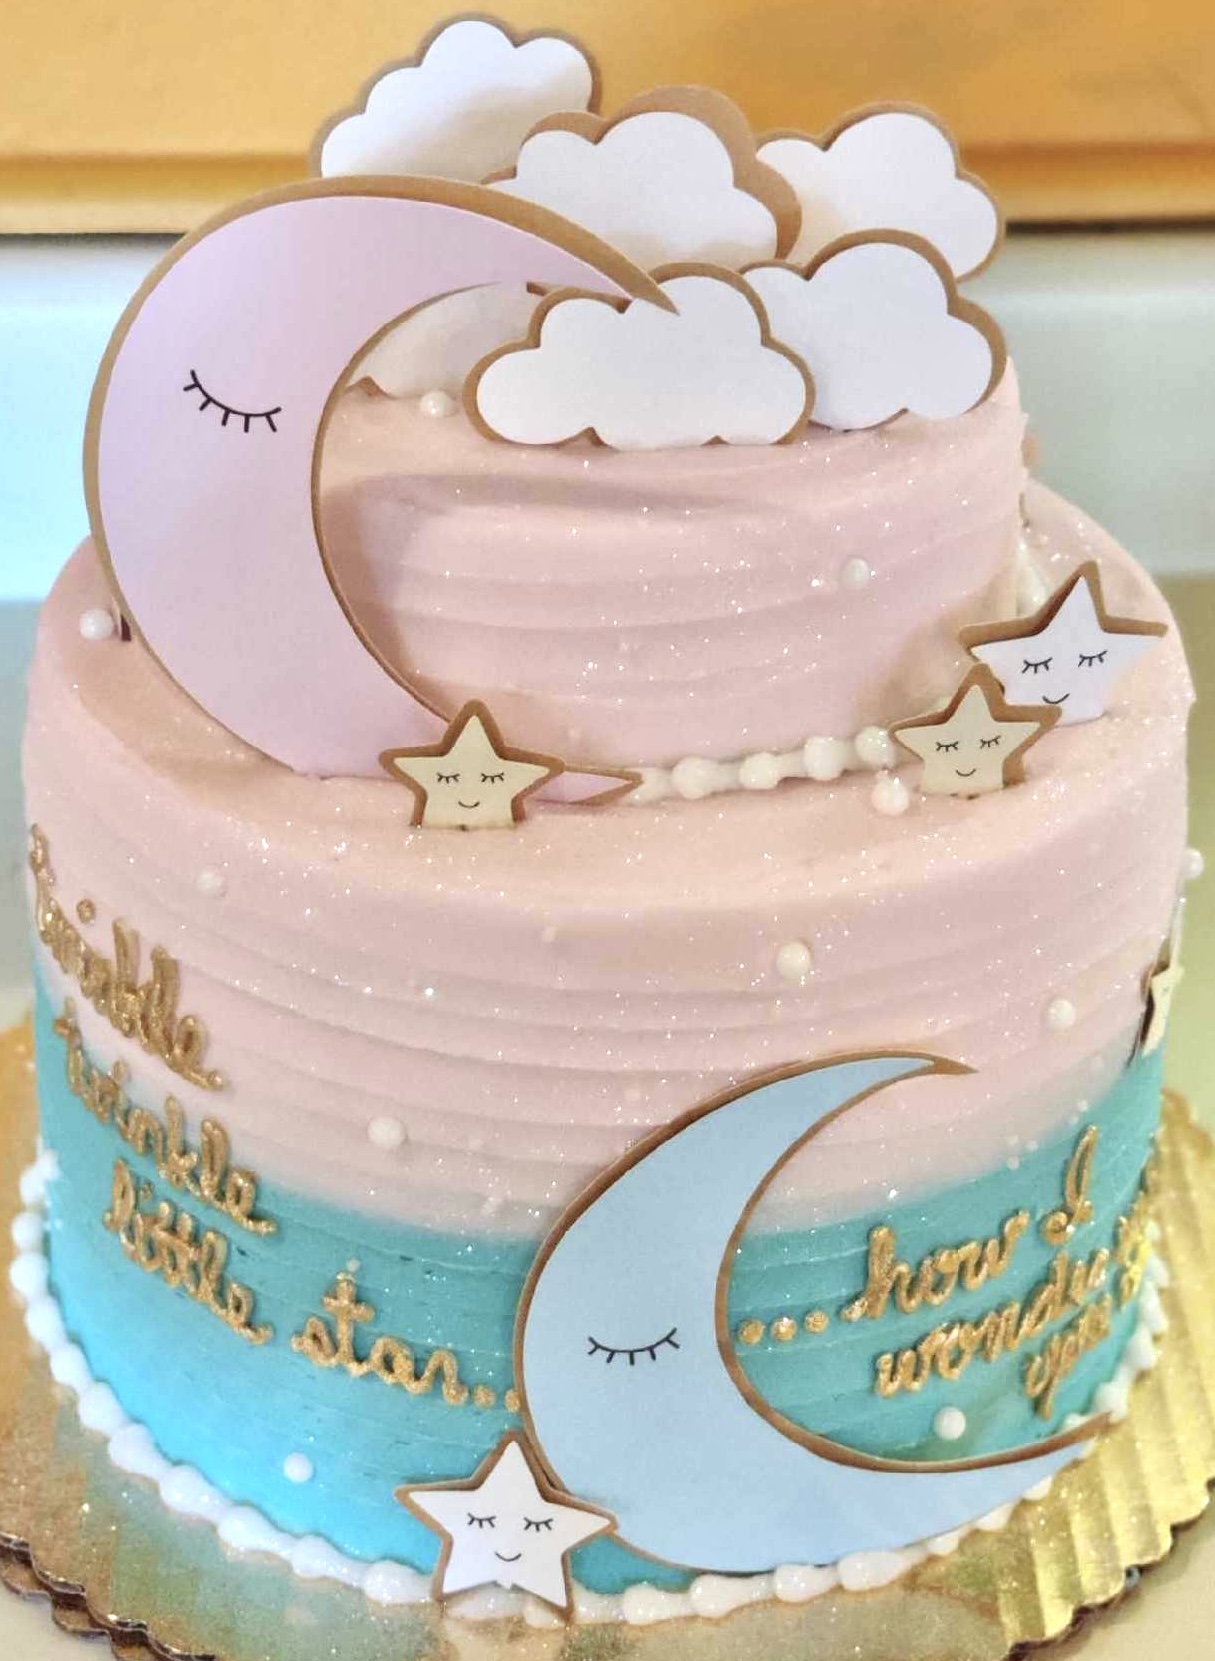 Amazing Cakes for Any Occasion